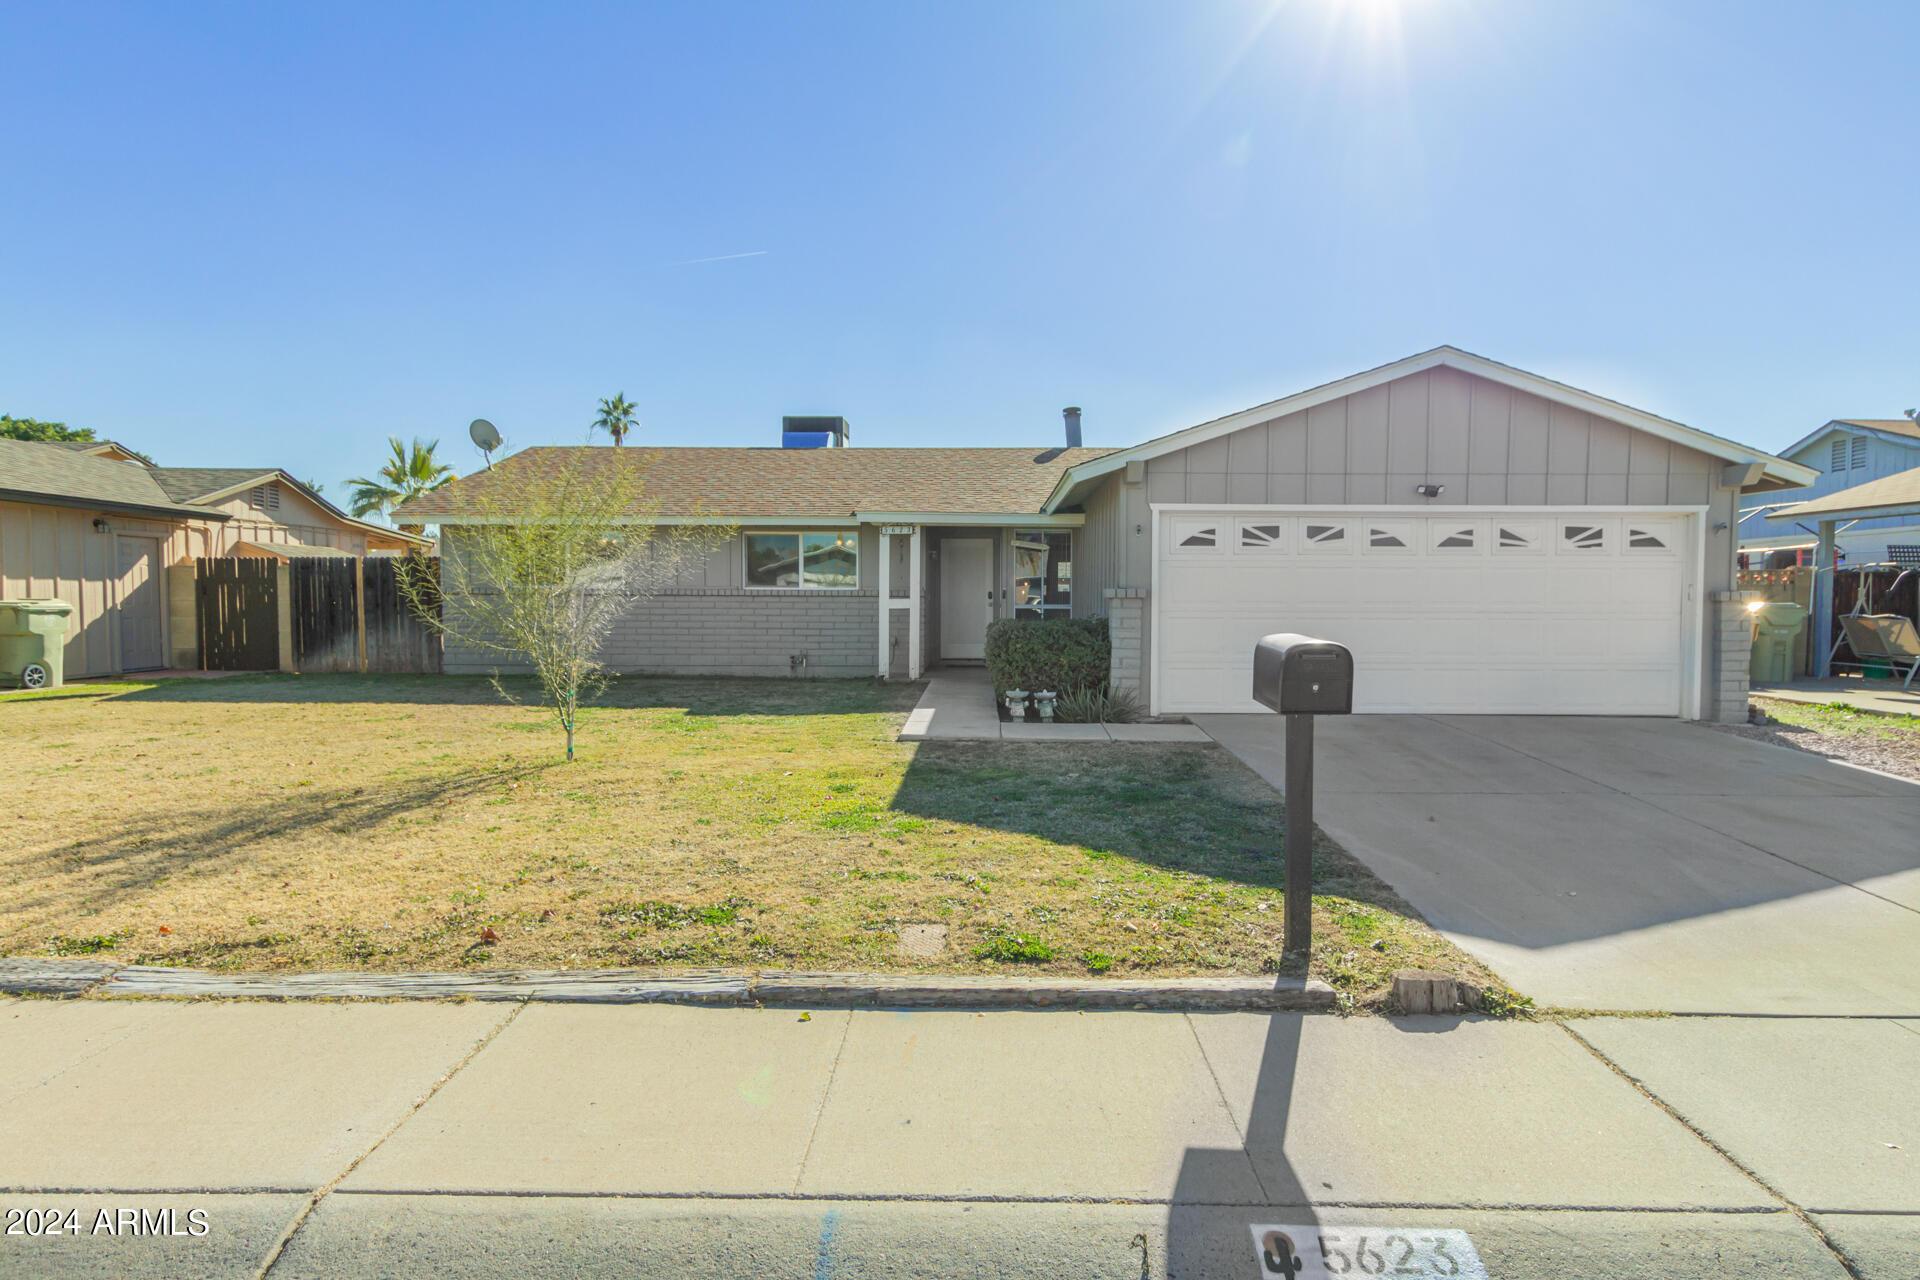 5623 COCHISE, 6648580, Glendale, Single Family - Detached,  for sale, Audi Seher, Mountain Sage Realty